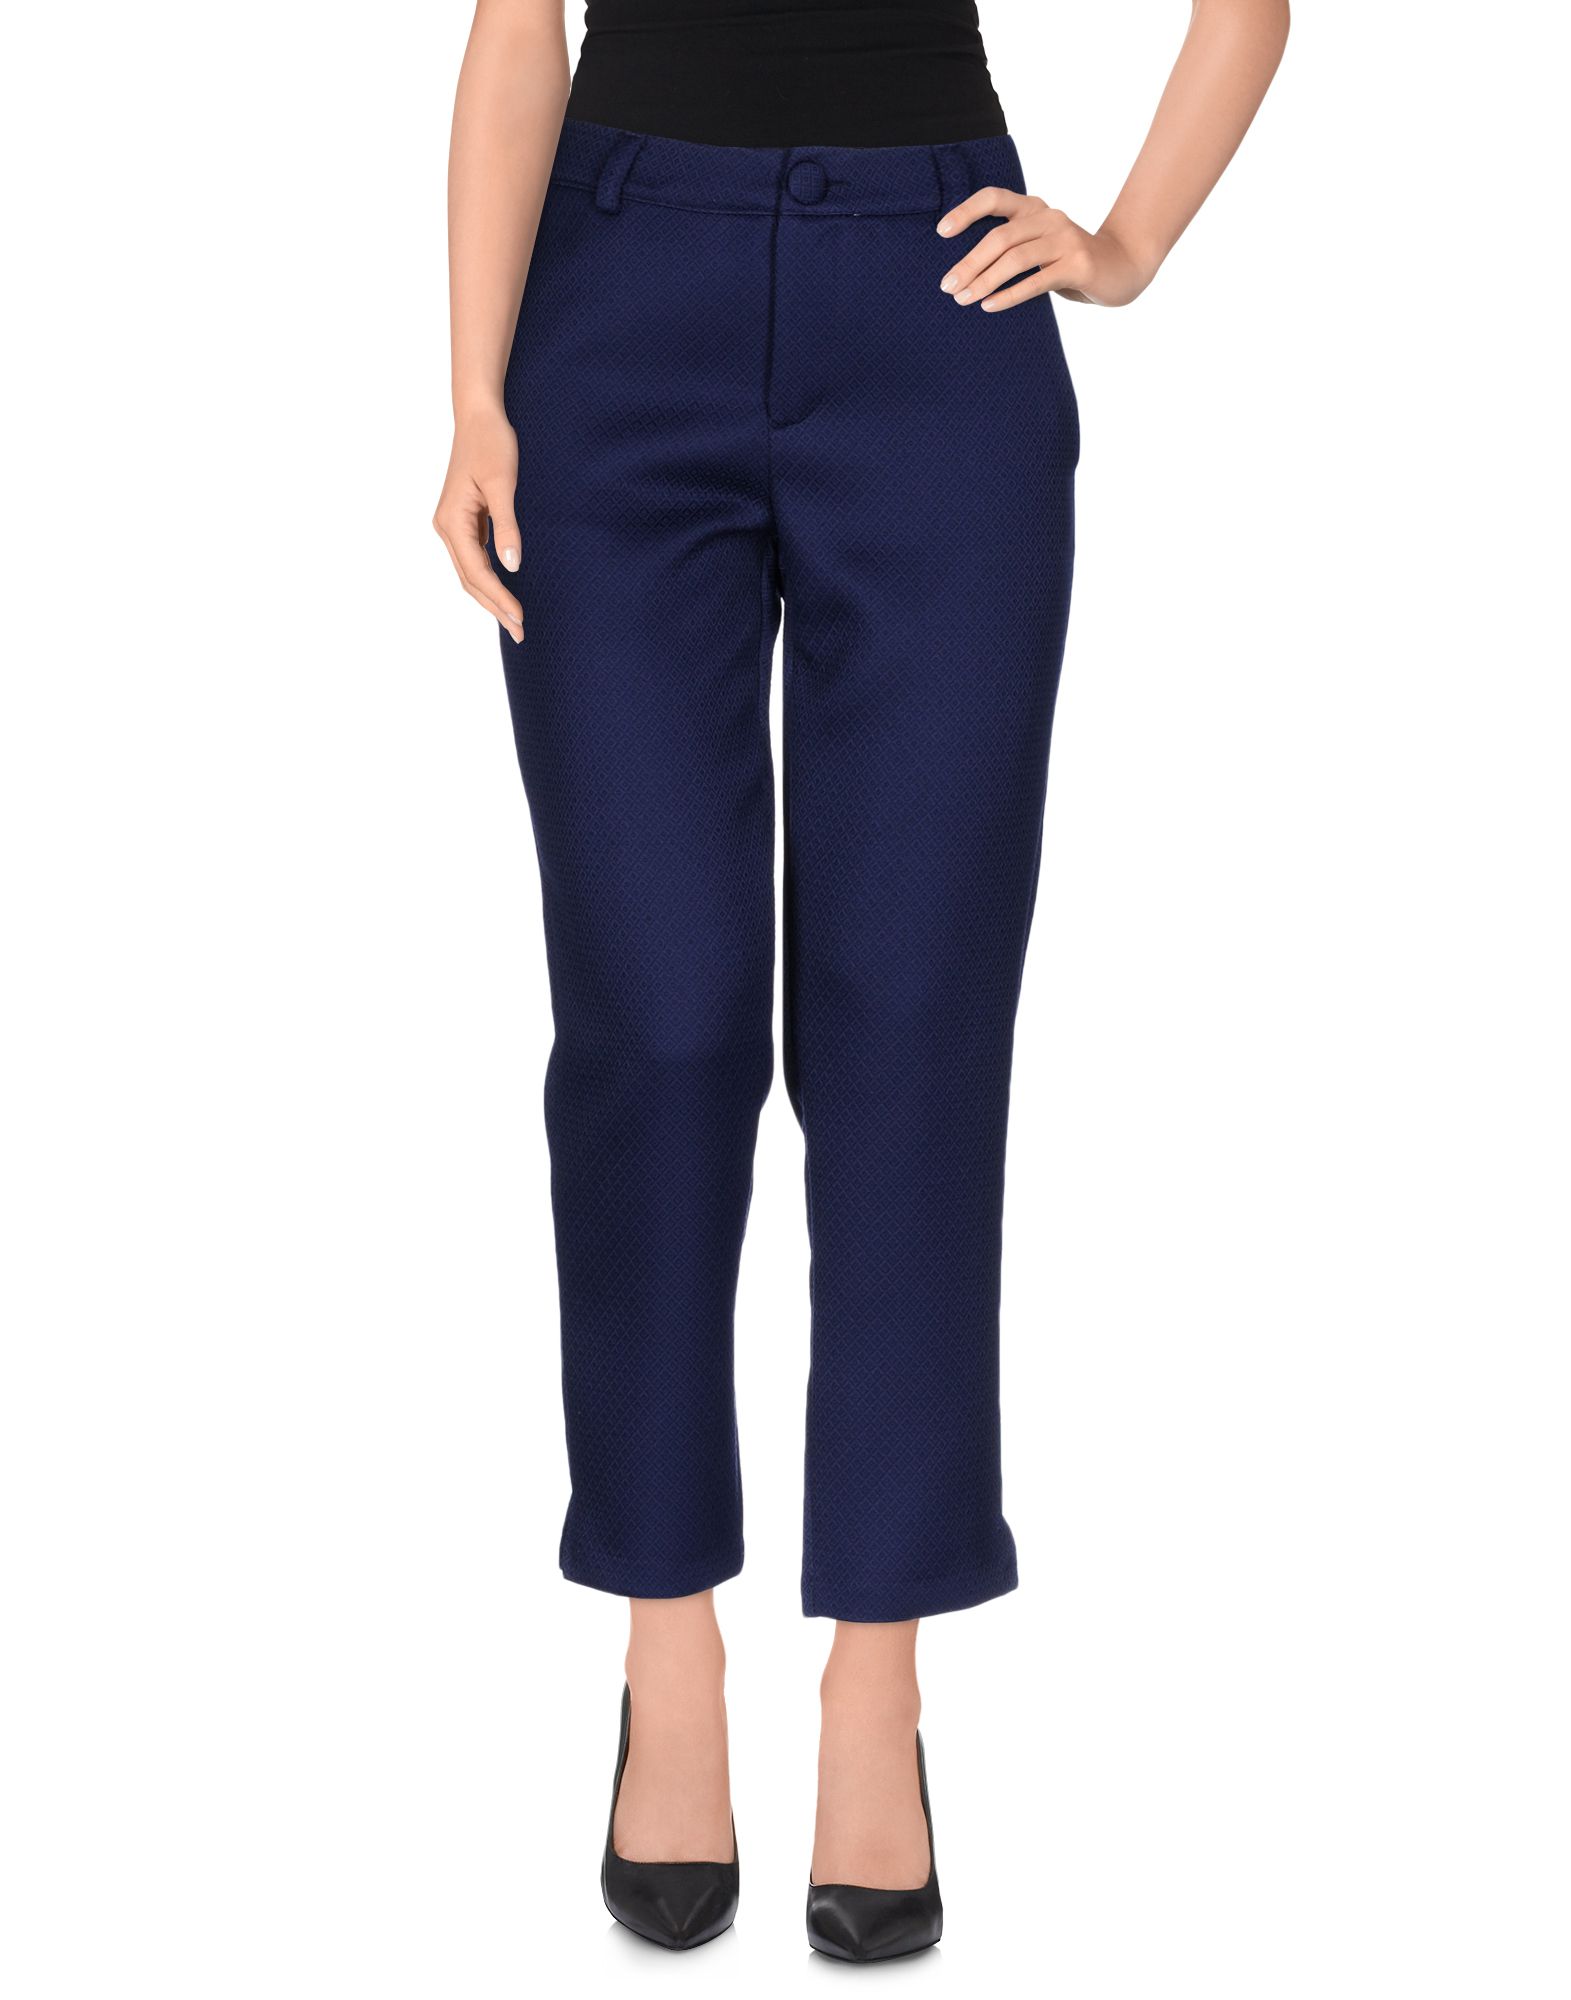 Anonyme Designers Casual Trouser   Women Anonyme Designers Casual Trousers   36759735TD